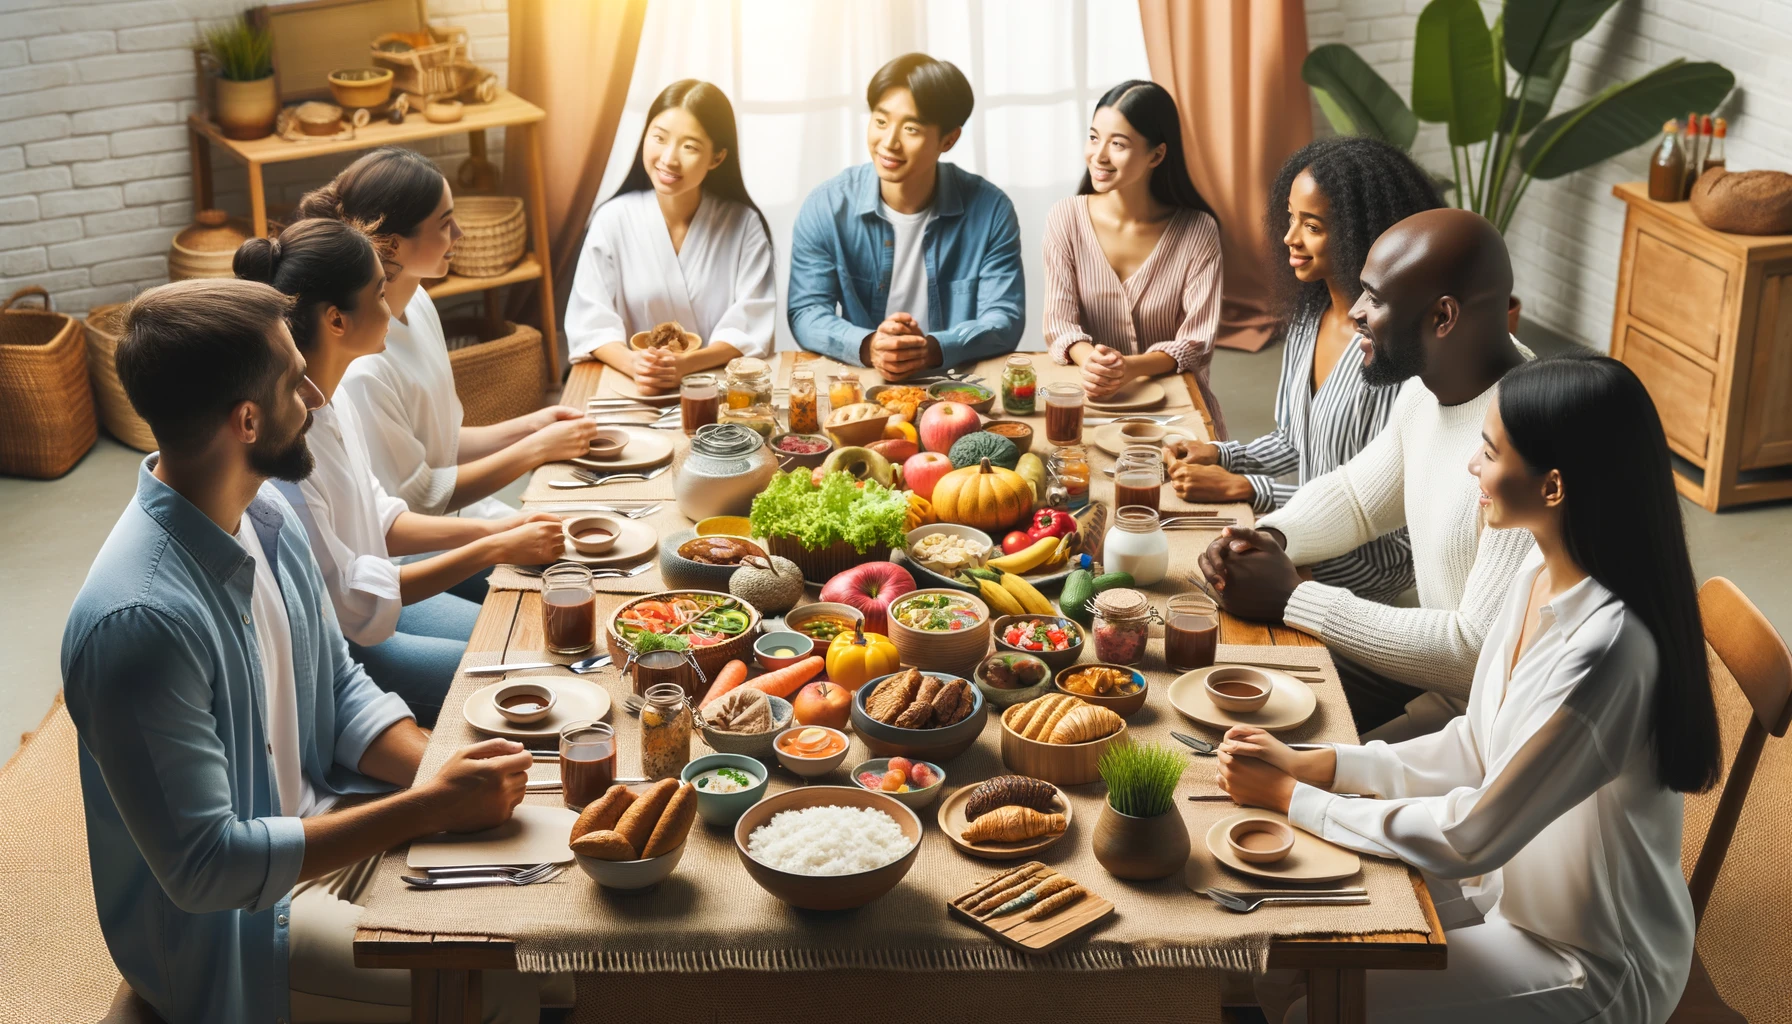 A group of diverse individuals sharing and enjoying dishes from various cultures, promoting understanding and respect for different dietary practices.